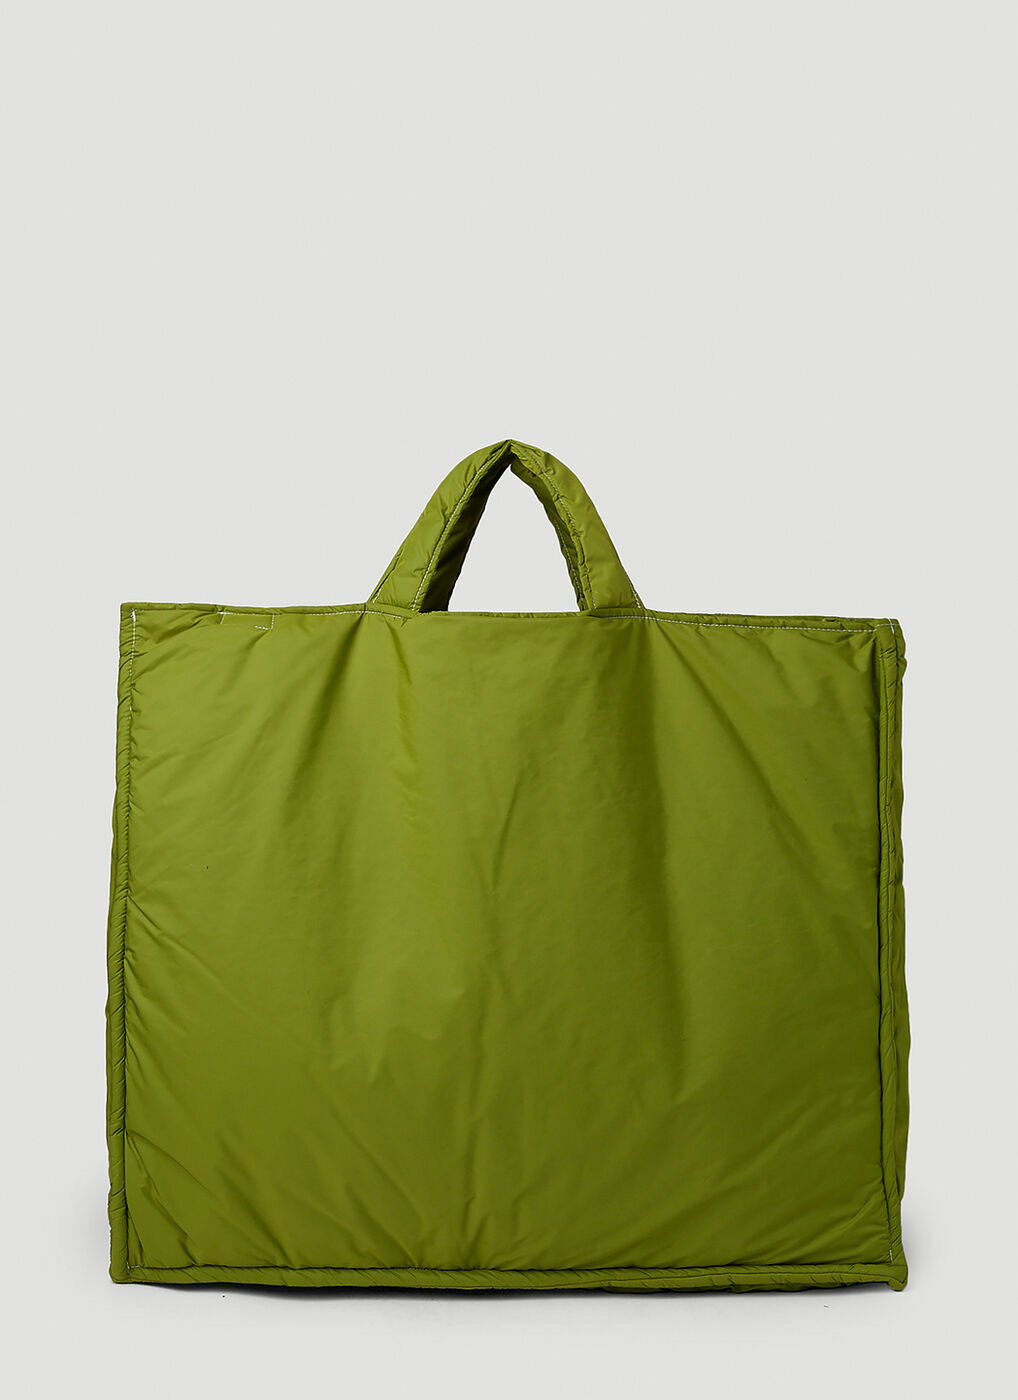 Puffed XL Tote Bag in Green Camiel Fortgens